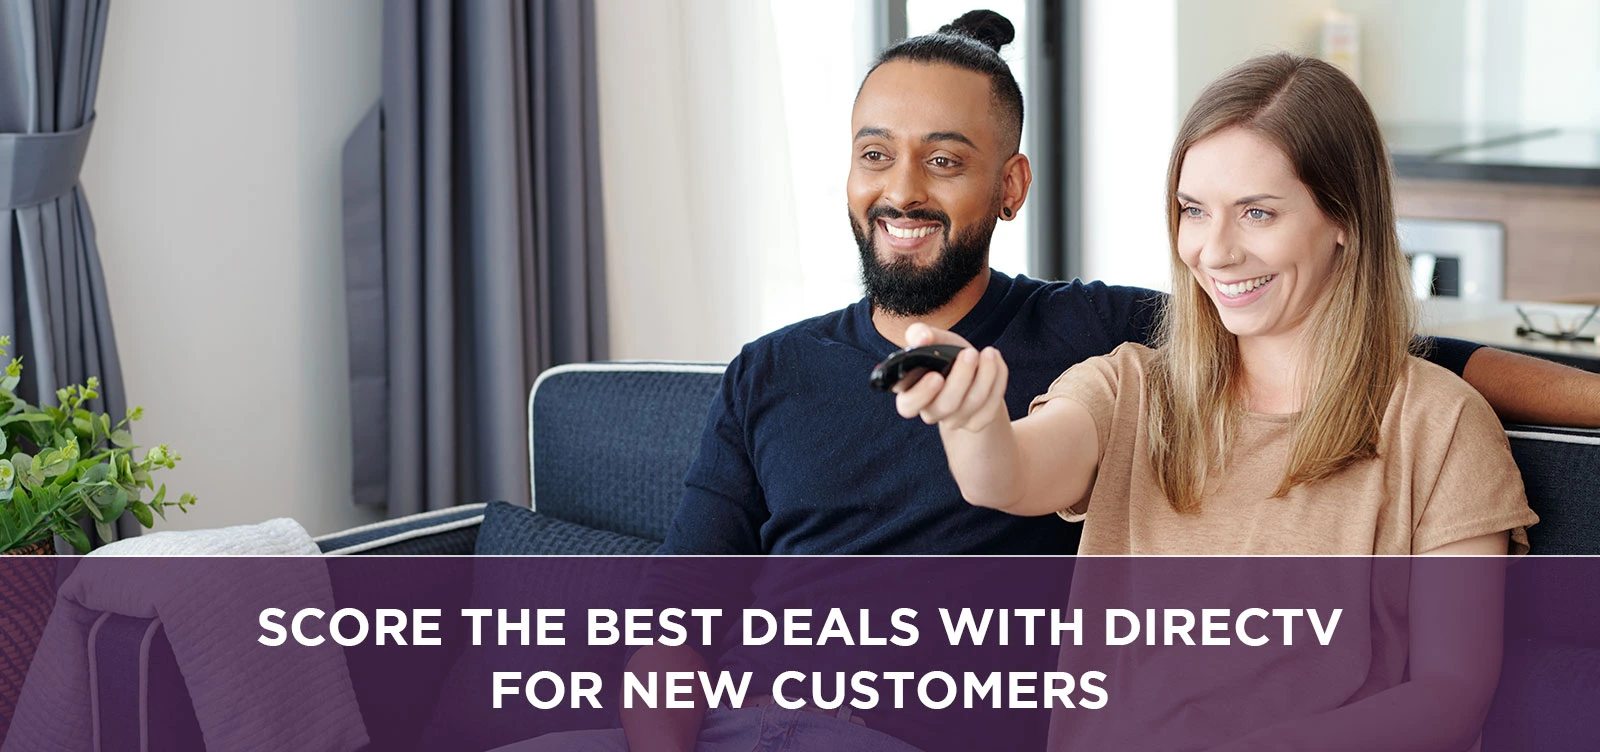 Score the Best Deals with Directv for New Customers